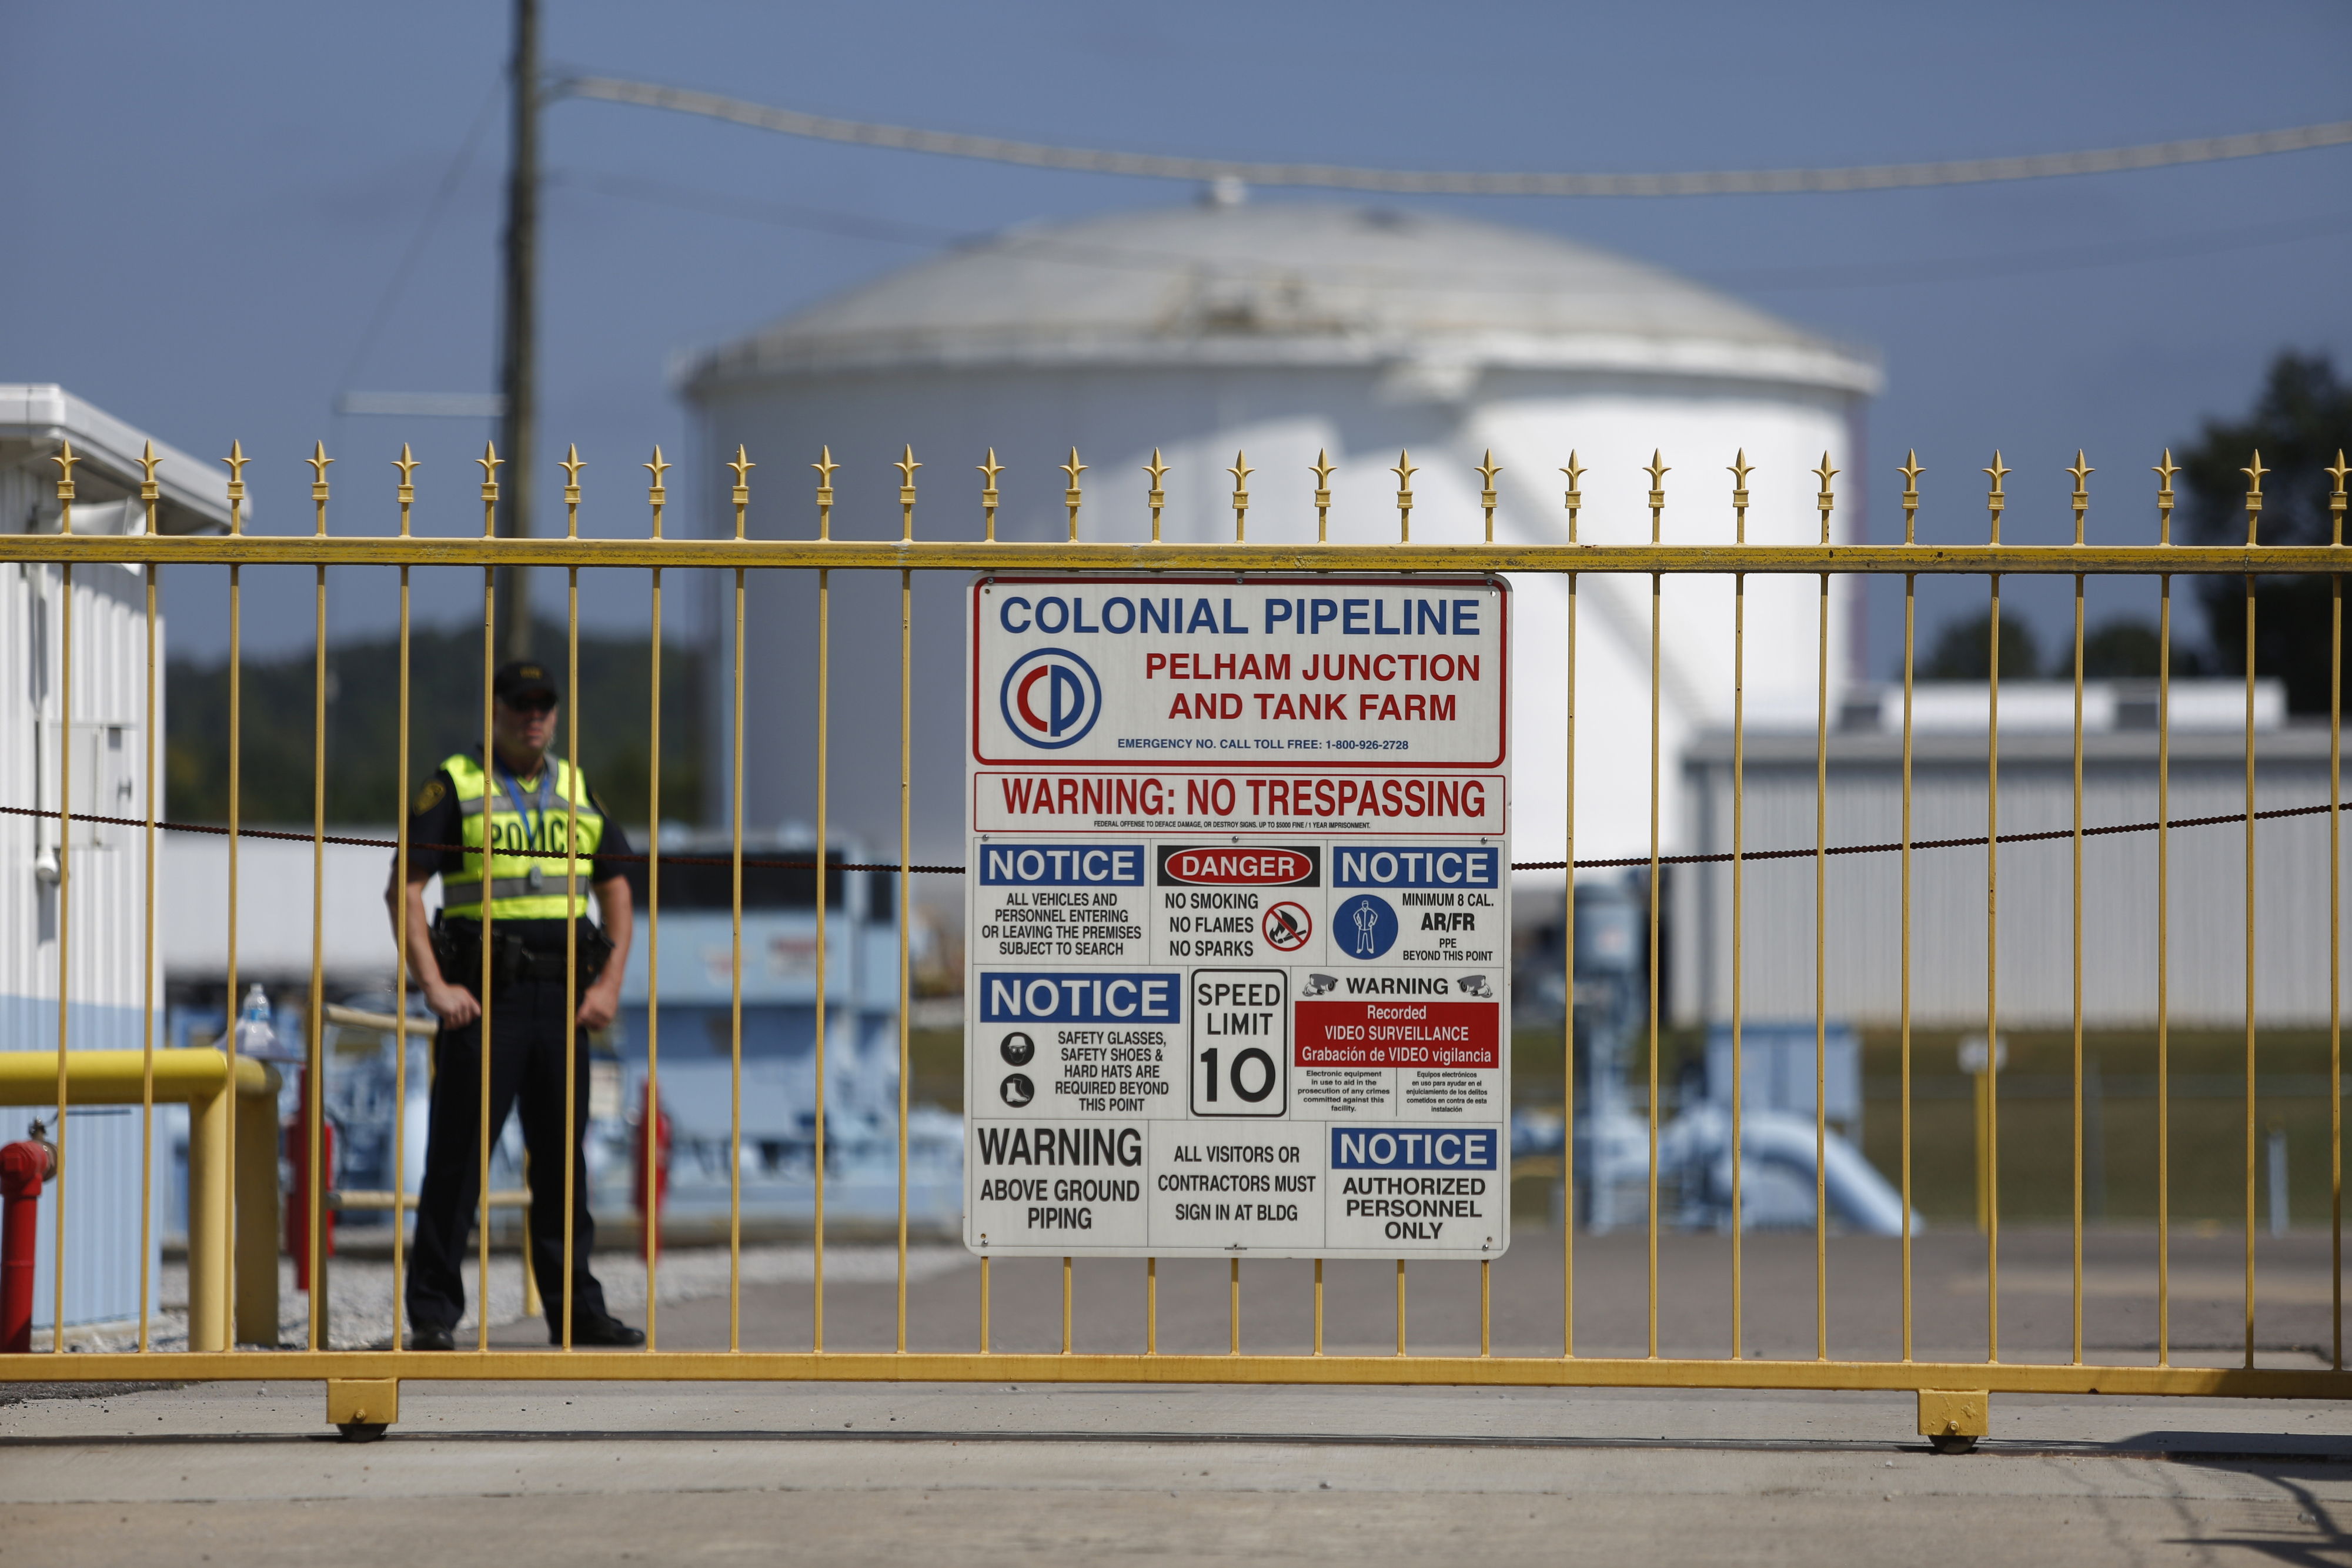 A police officer stands guard outside the Colonial Pipeline’s tank farm in Alabama.